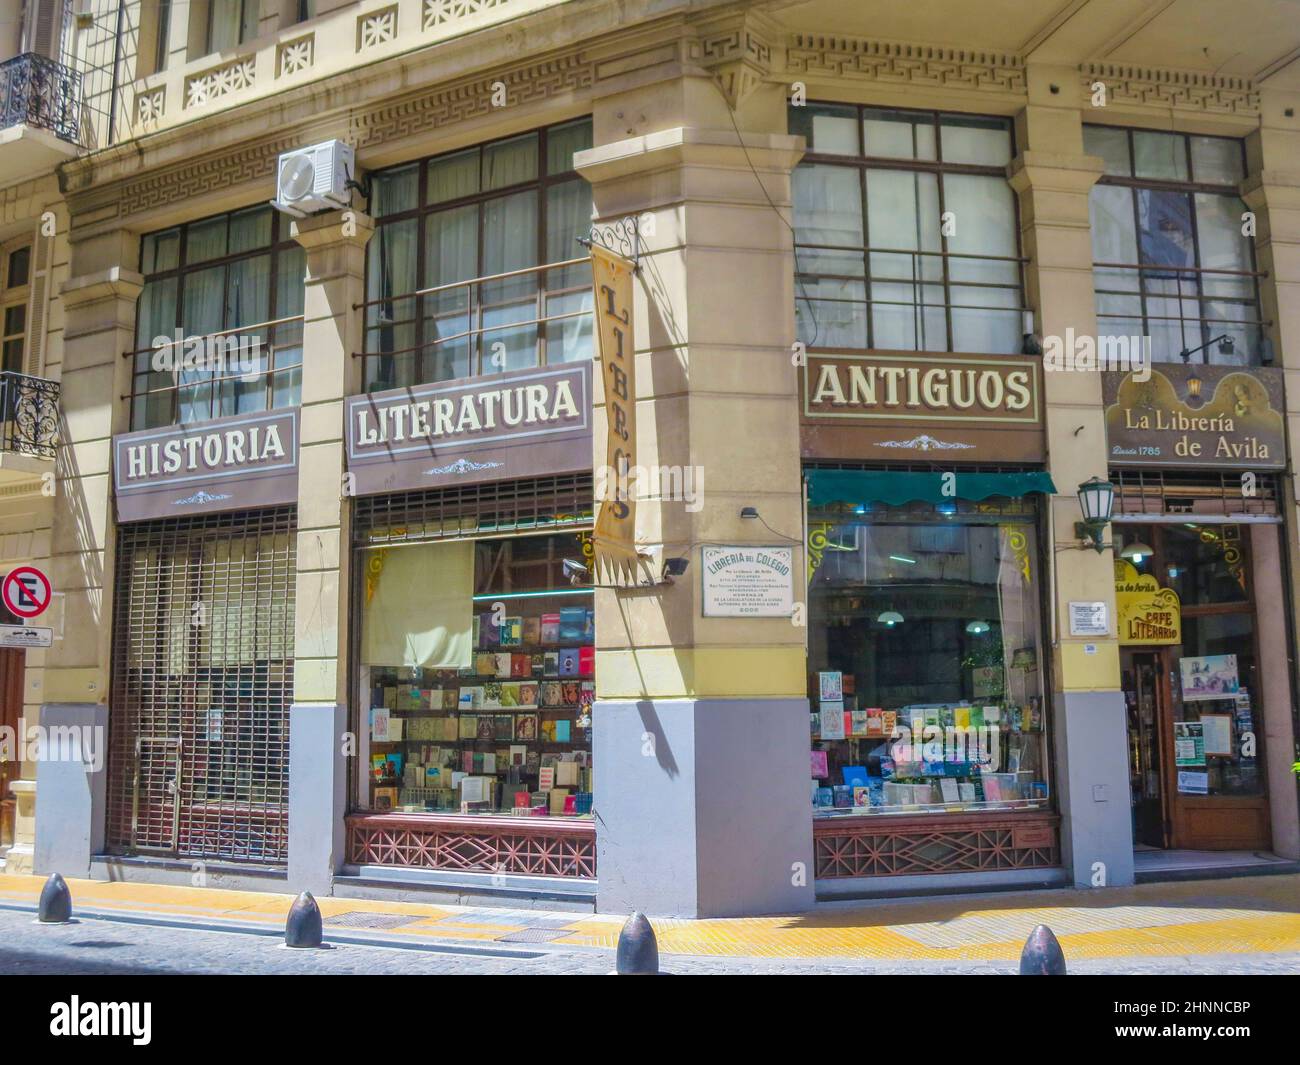 historic Libreria de Avila in Buenos Aires in the old part of town Stock Photo